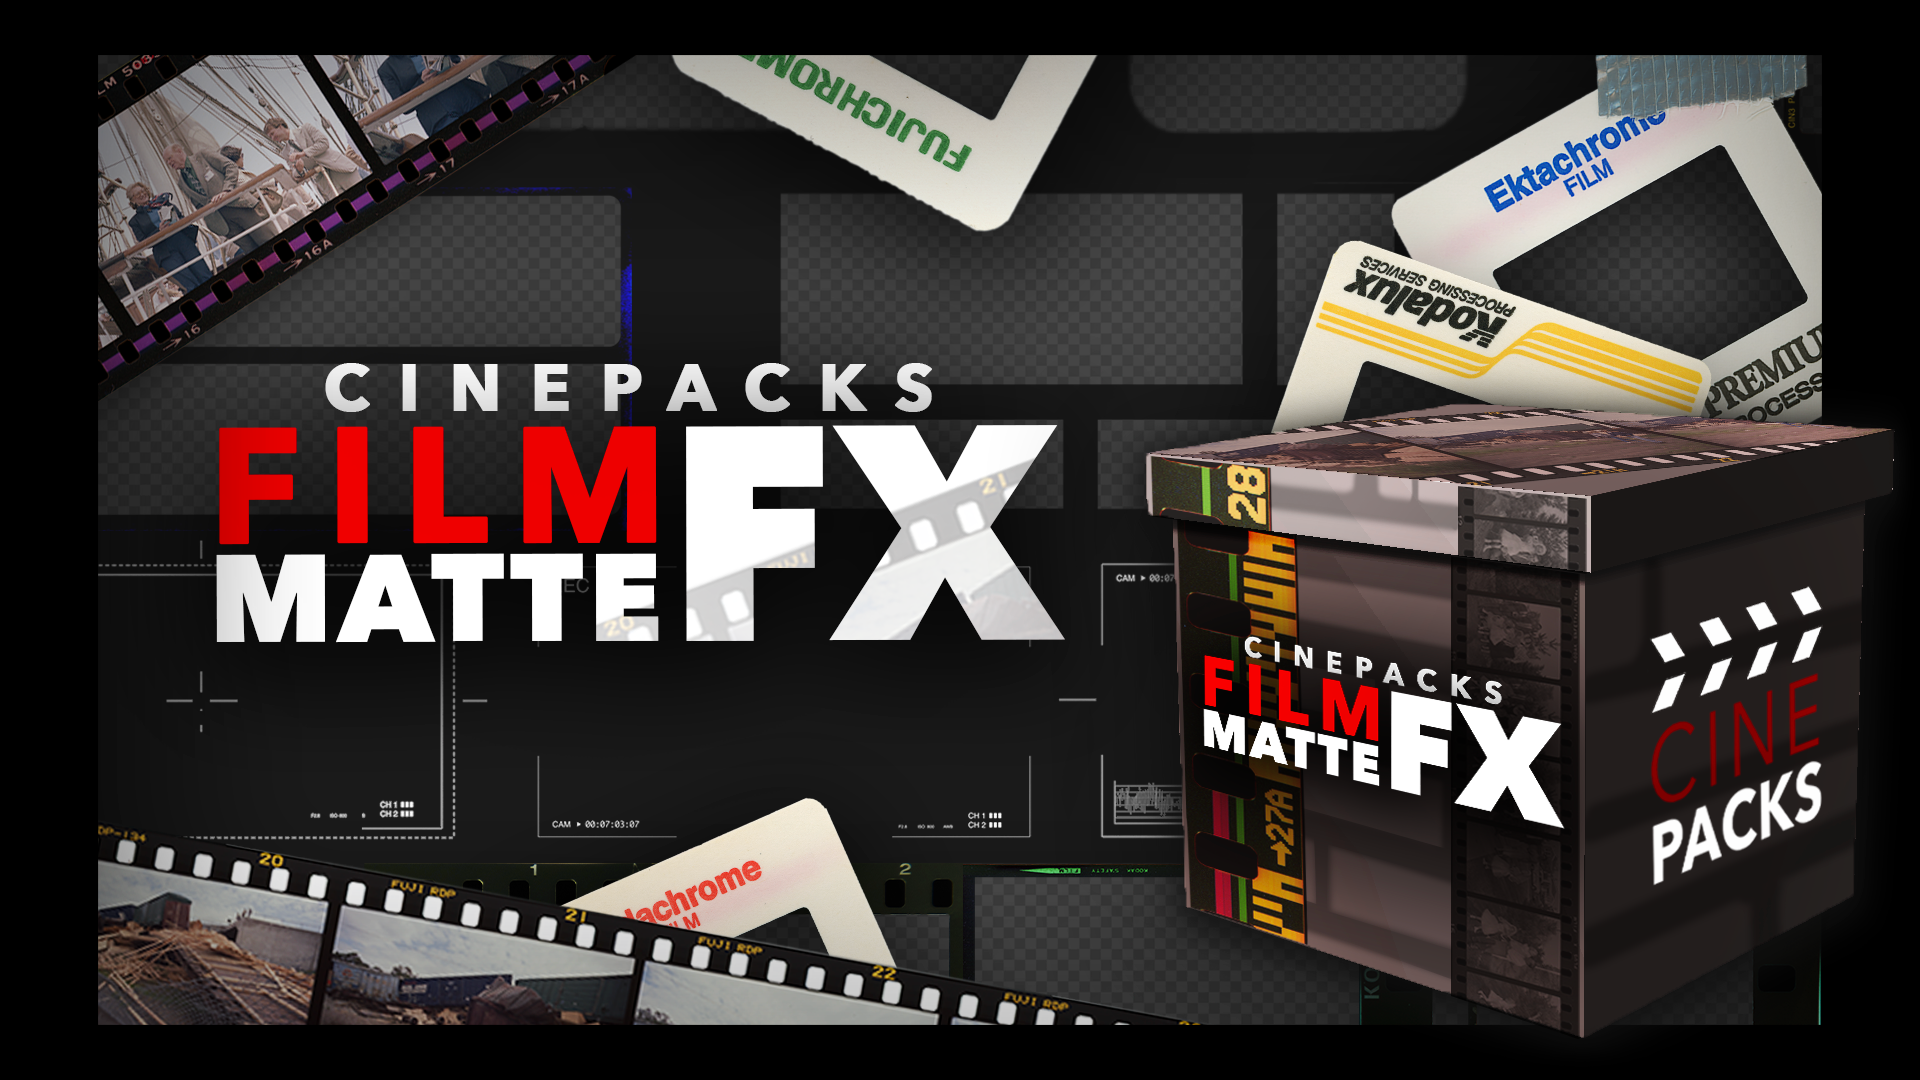 16mm Film Mattes Pack - Stock Motion Graphics